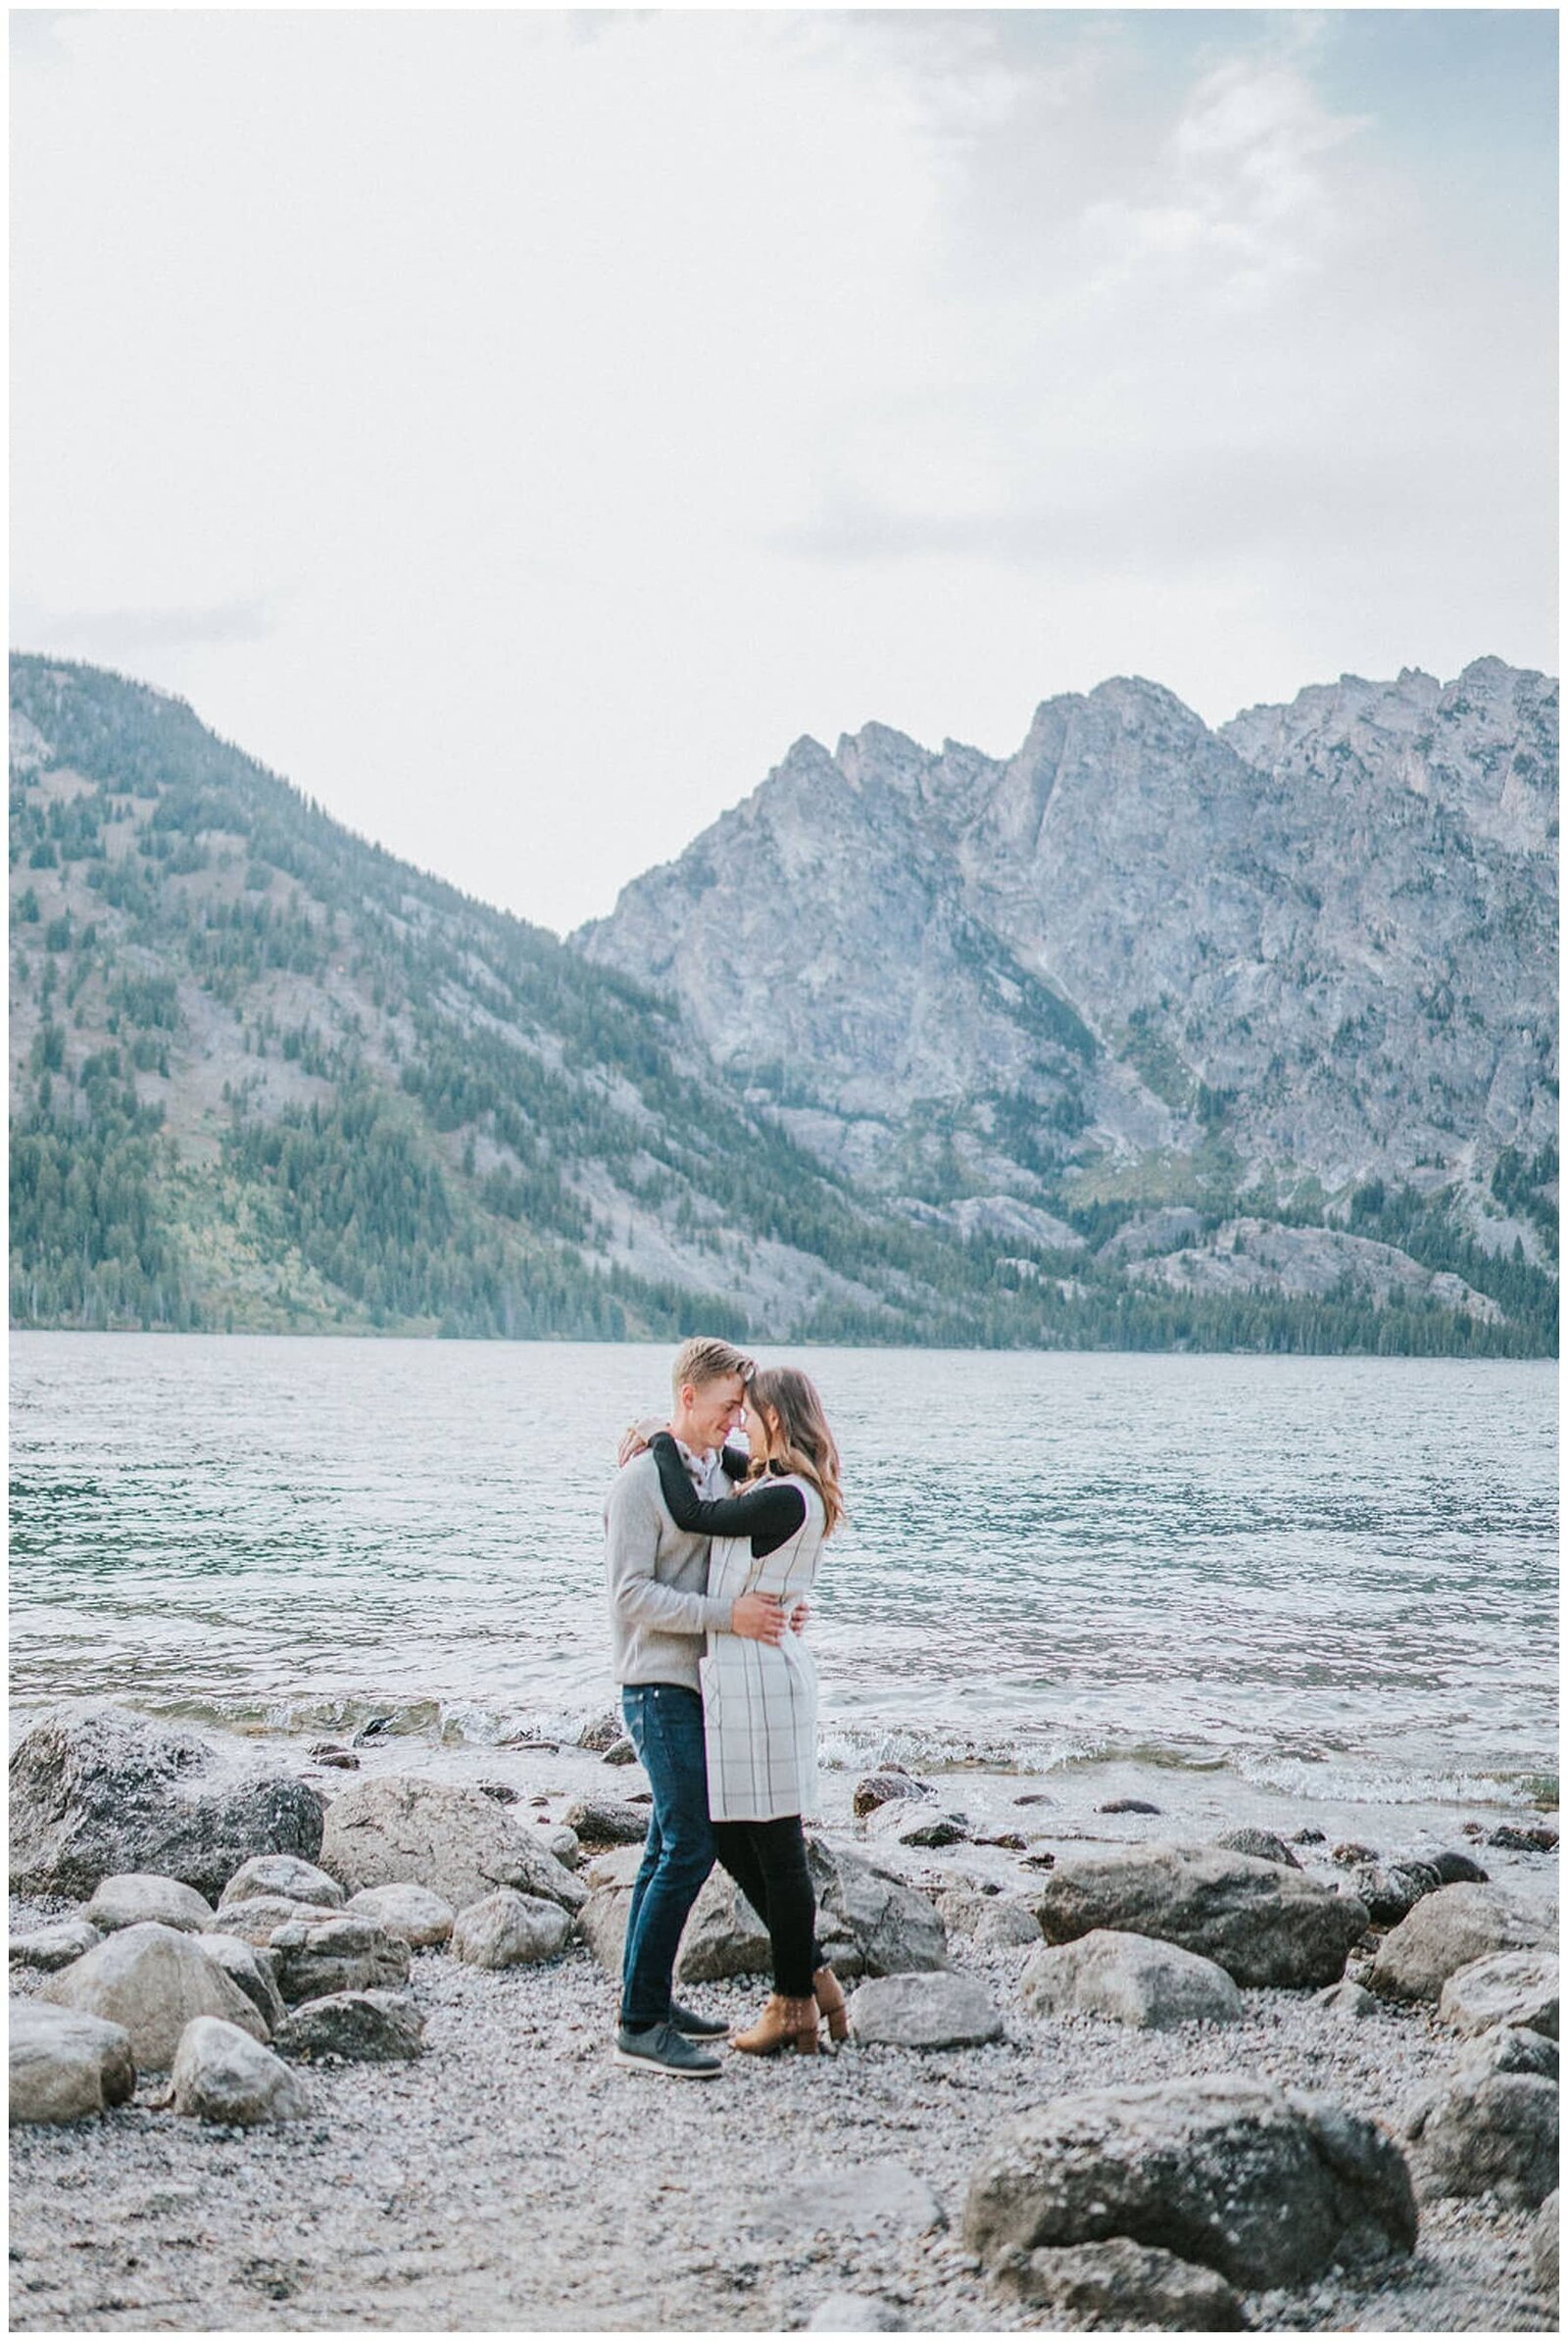 Knoxville Wedding Photographer | couple by mountains and lake in Chattanooga Tennessee